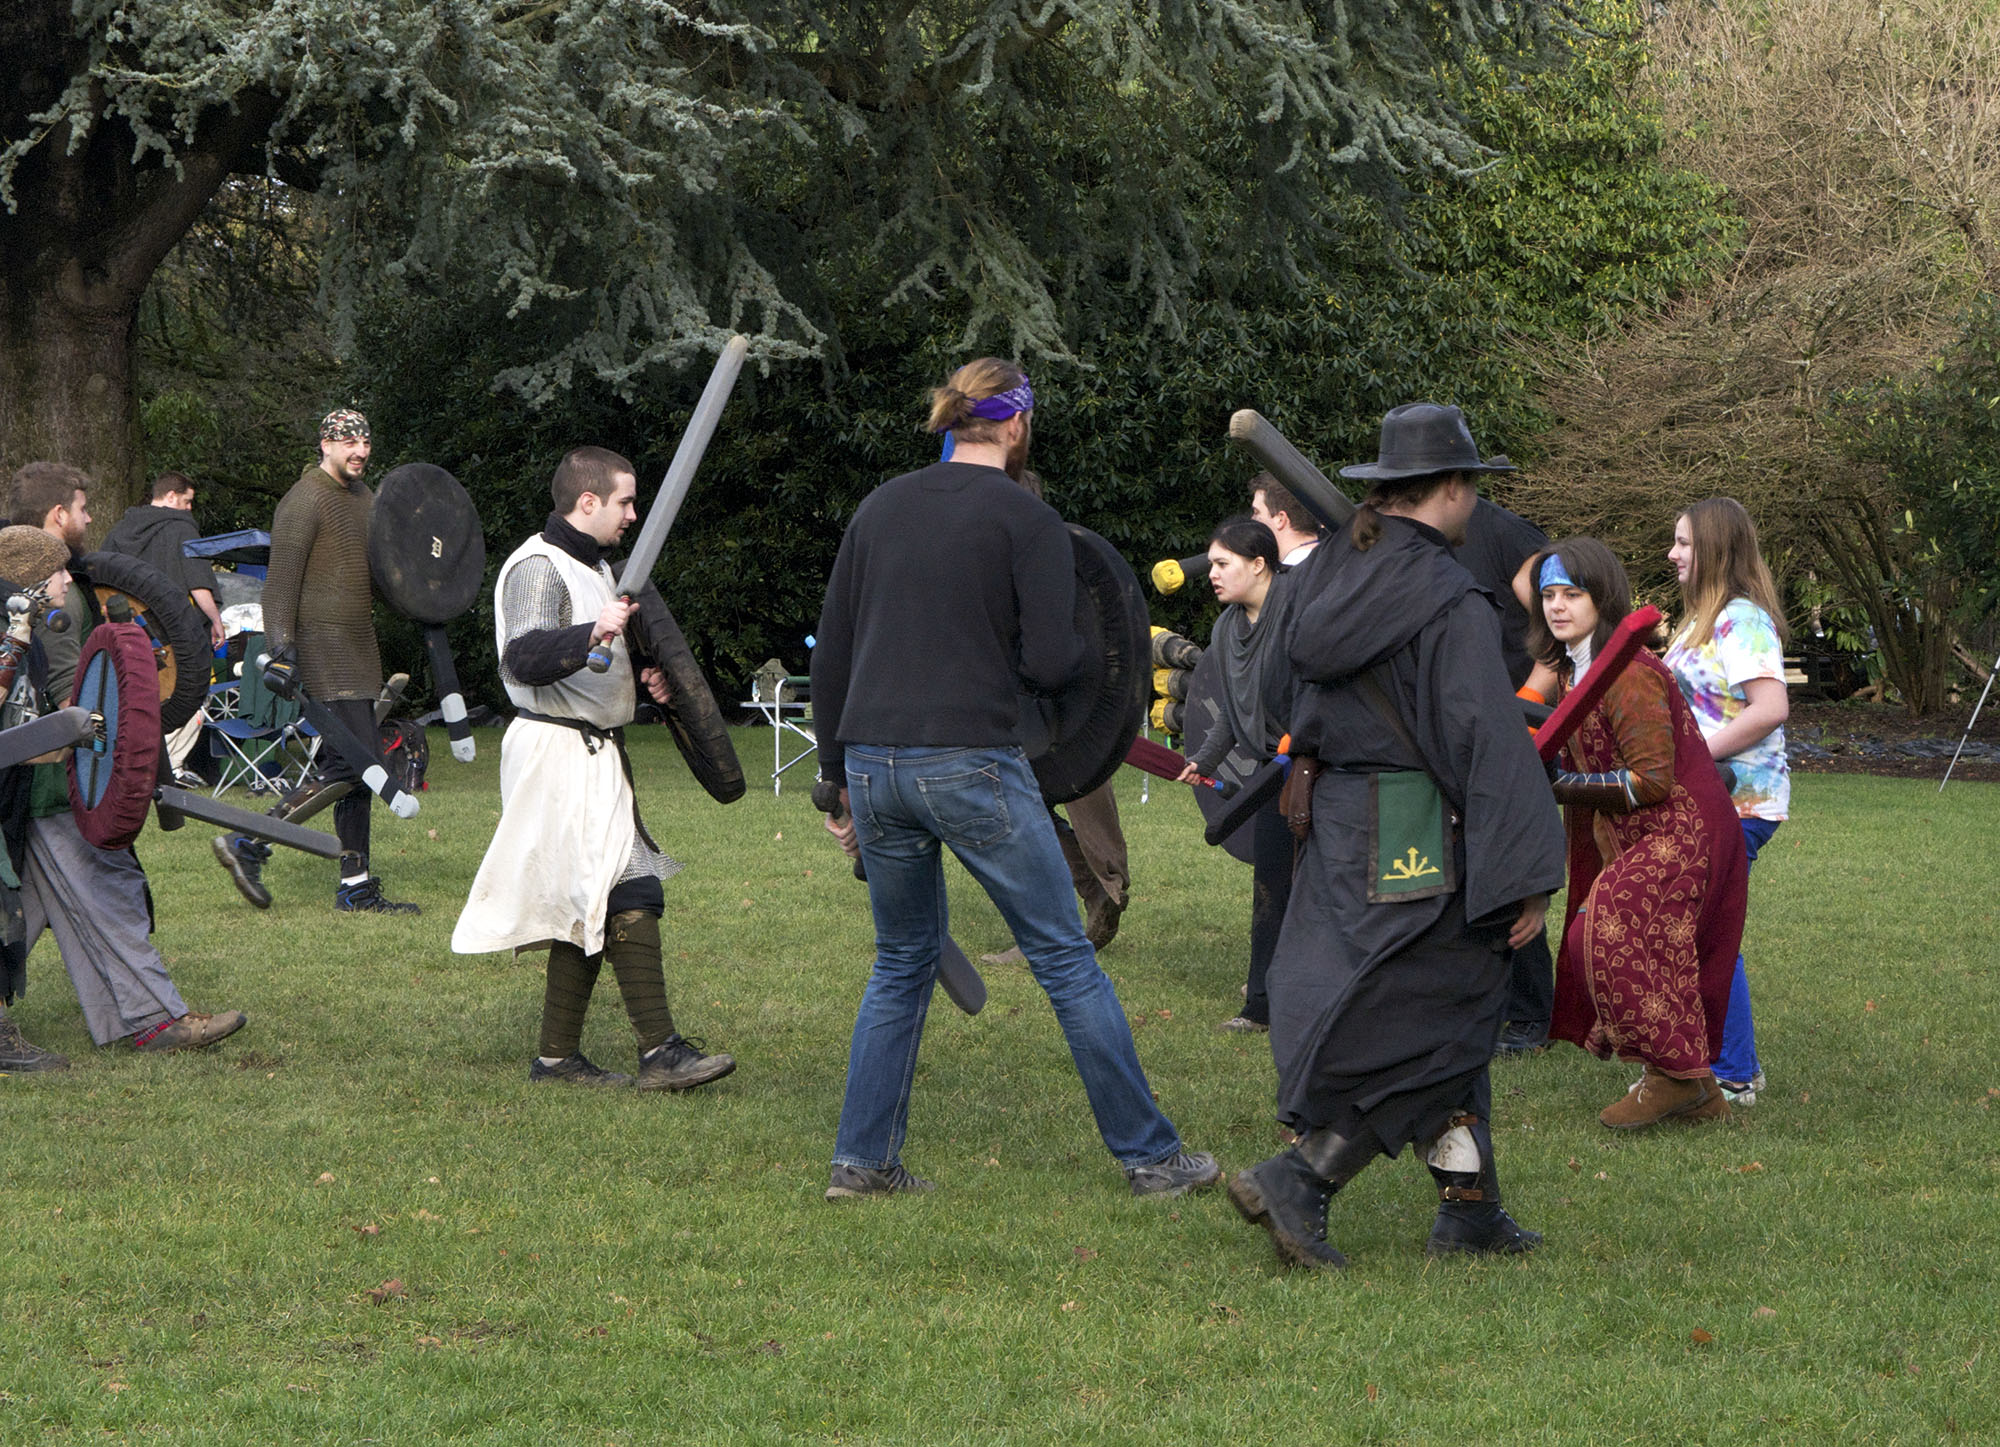 Gallery%3A+Larp+in+the+Park